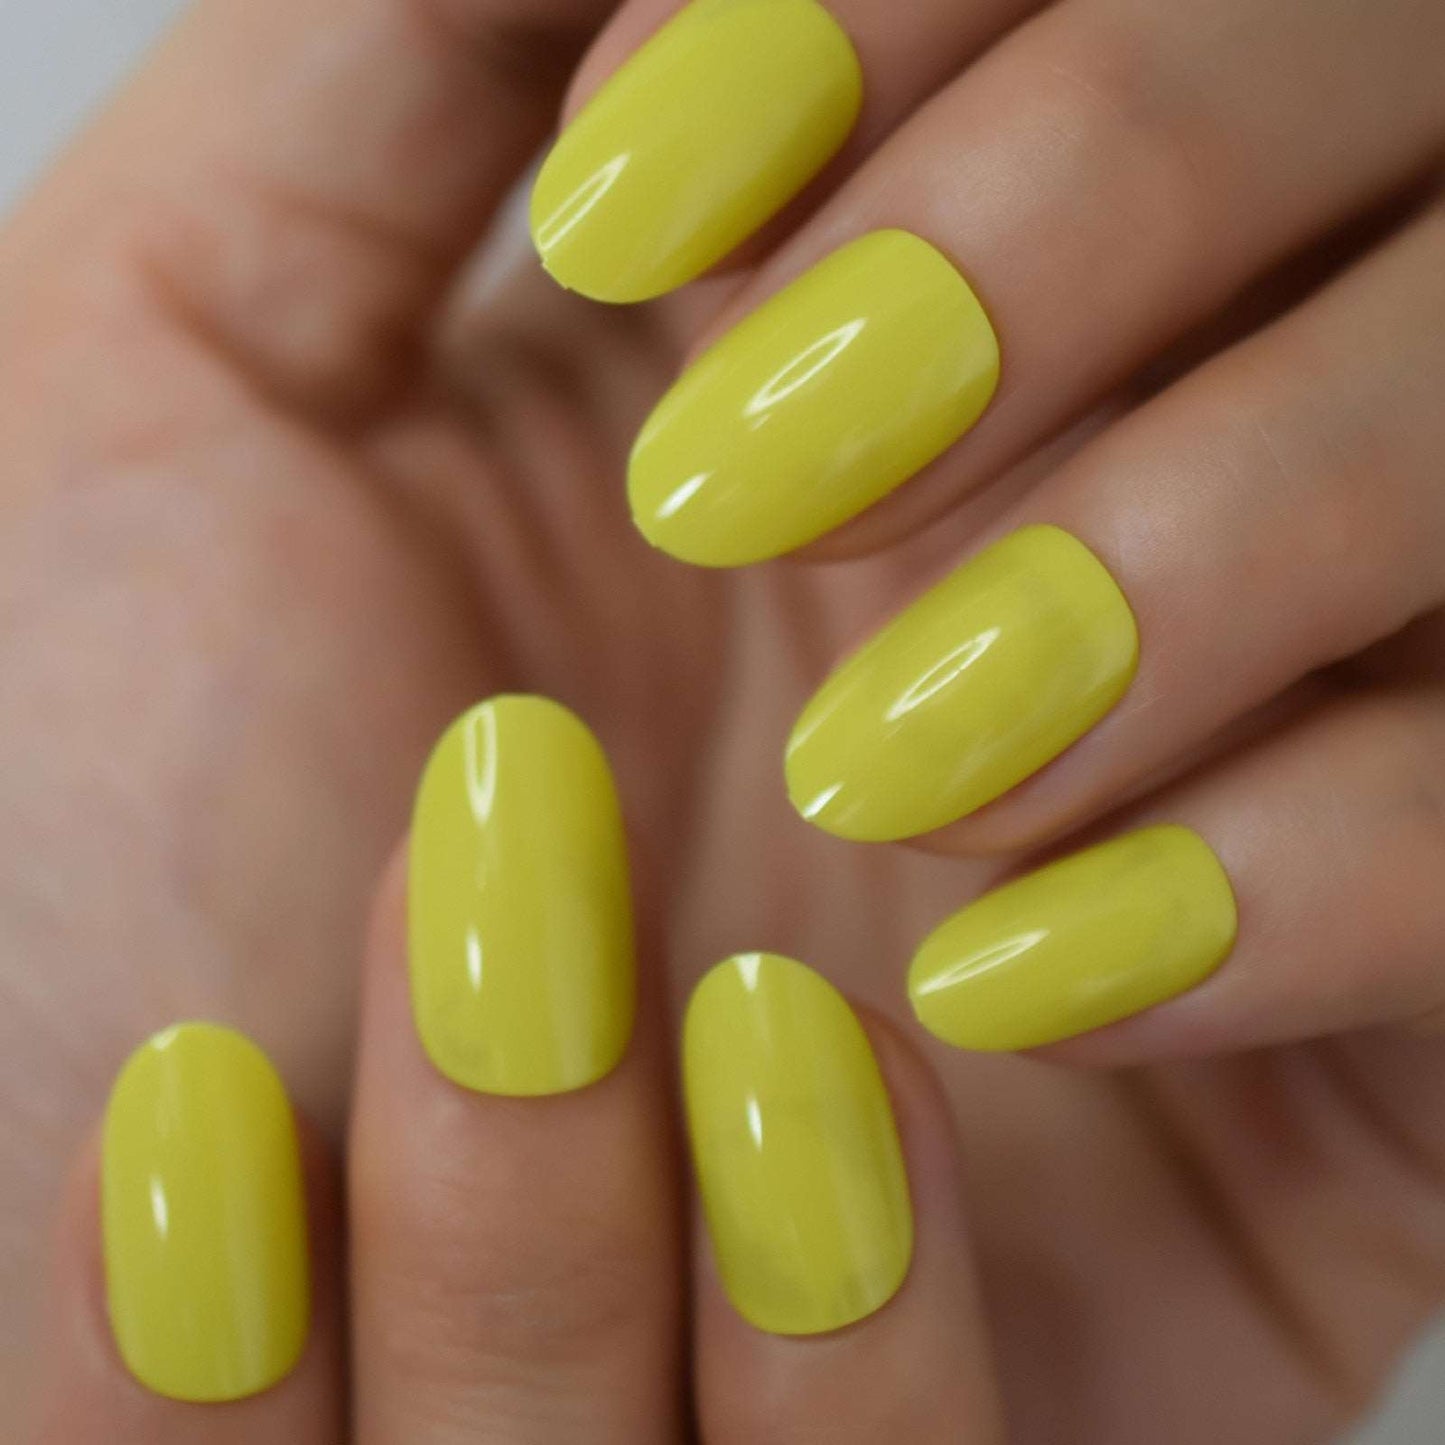 Faux Ongles Courts Jaunes Brillants - Mes Faux Ongles